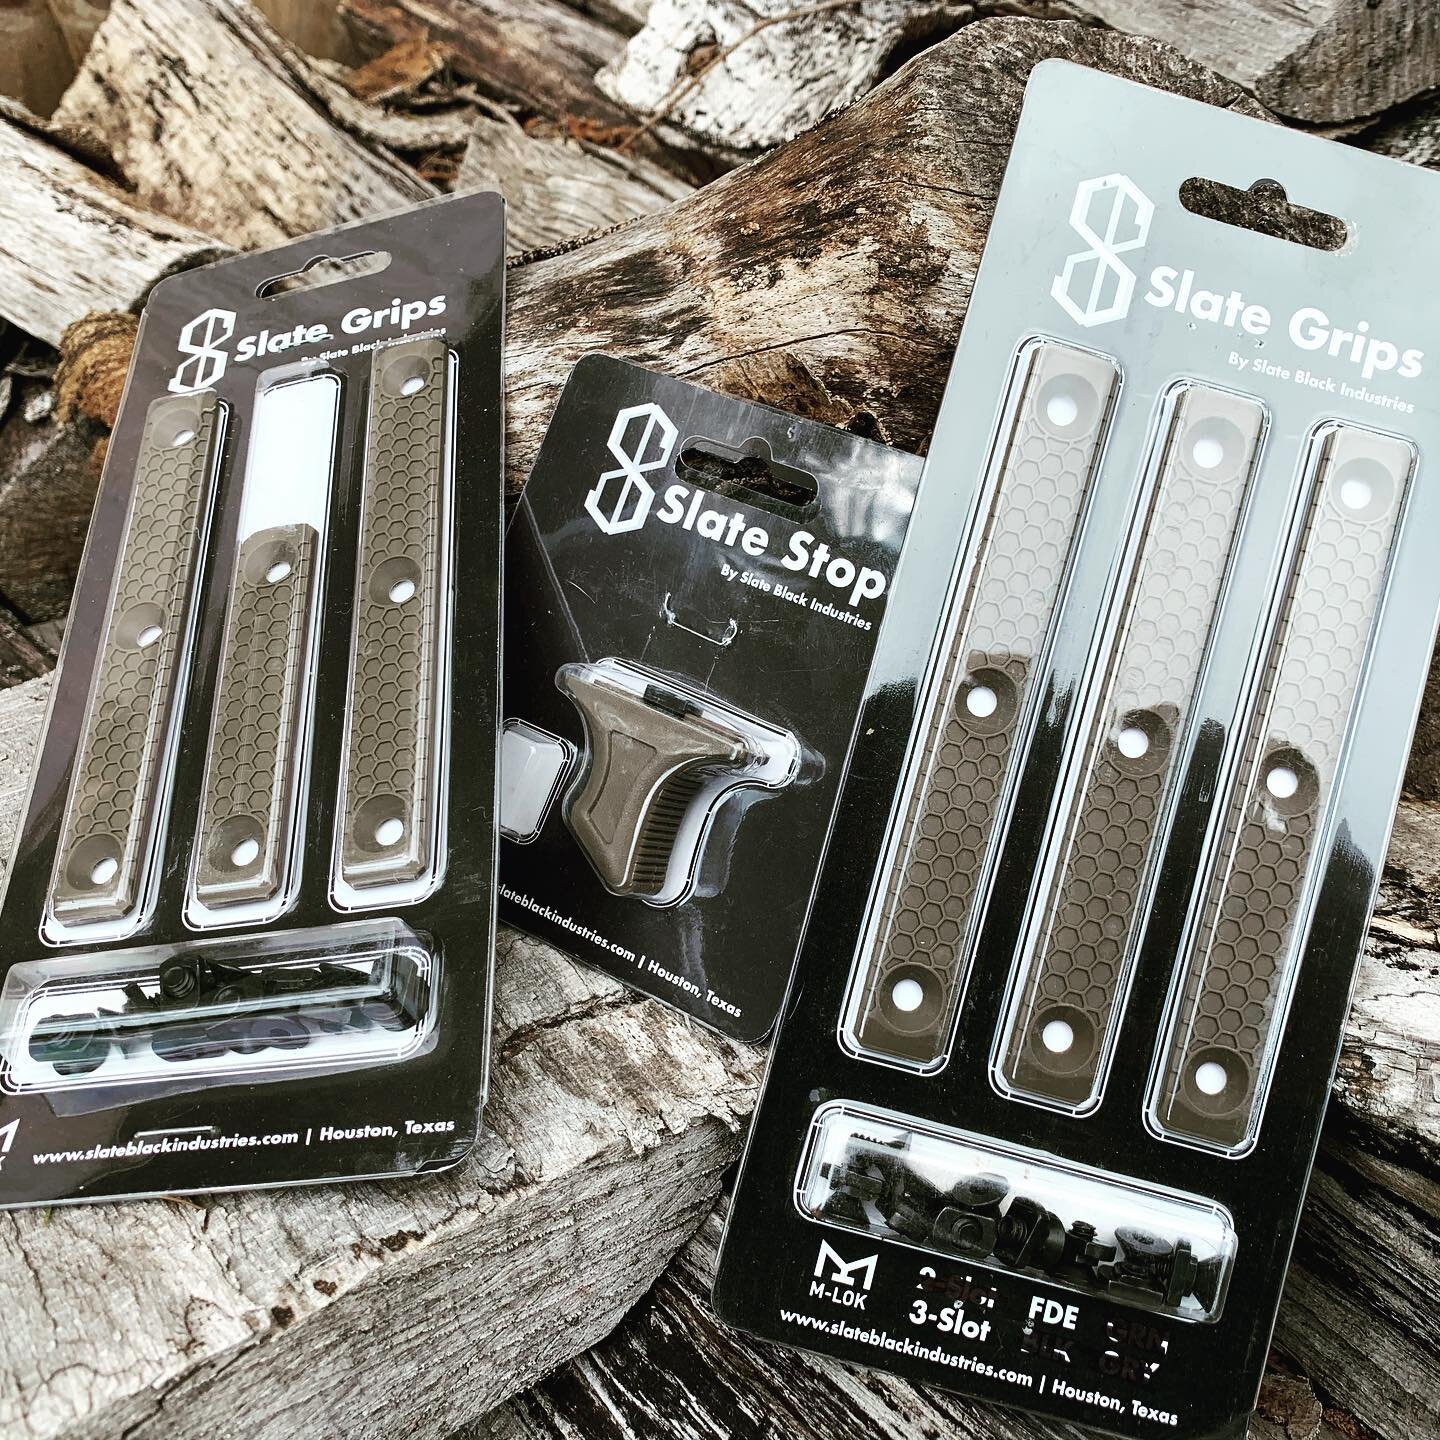 Head over to the EnglishShooting Facebook page for your chance to win this full set of @slateblackindustries rail panels and stop! 

#shooting #gun #guns #mlok #blackslateindustries #englishshooting #giveaway #win #competition #ar #ar15 #accessories 